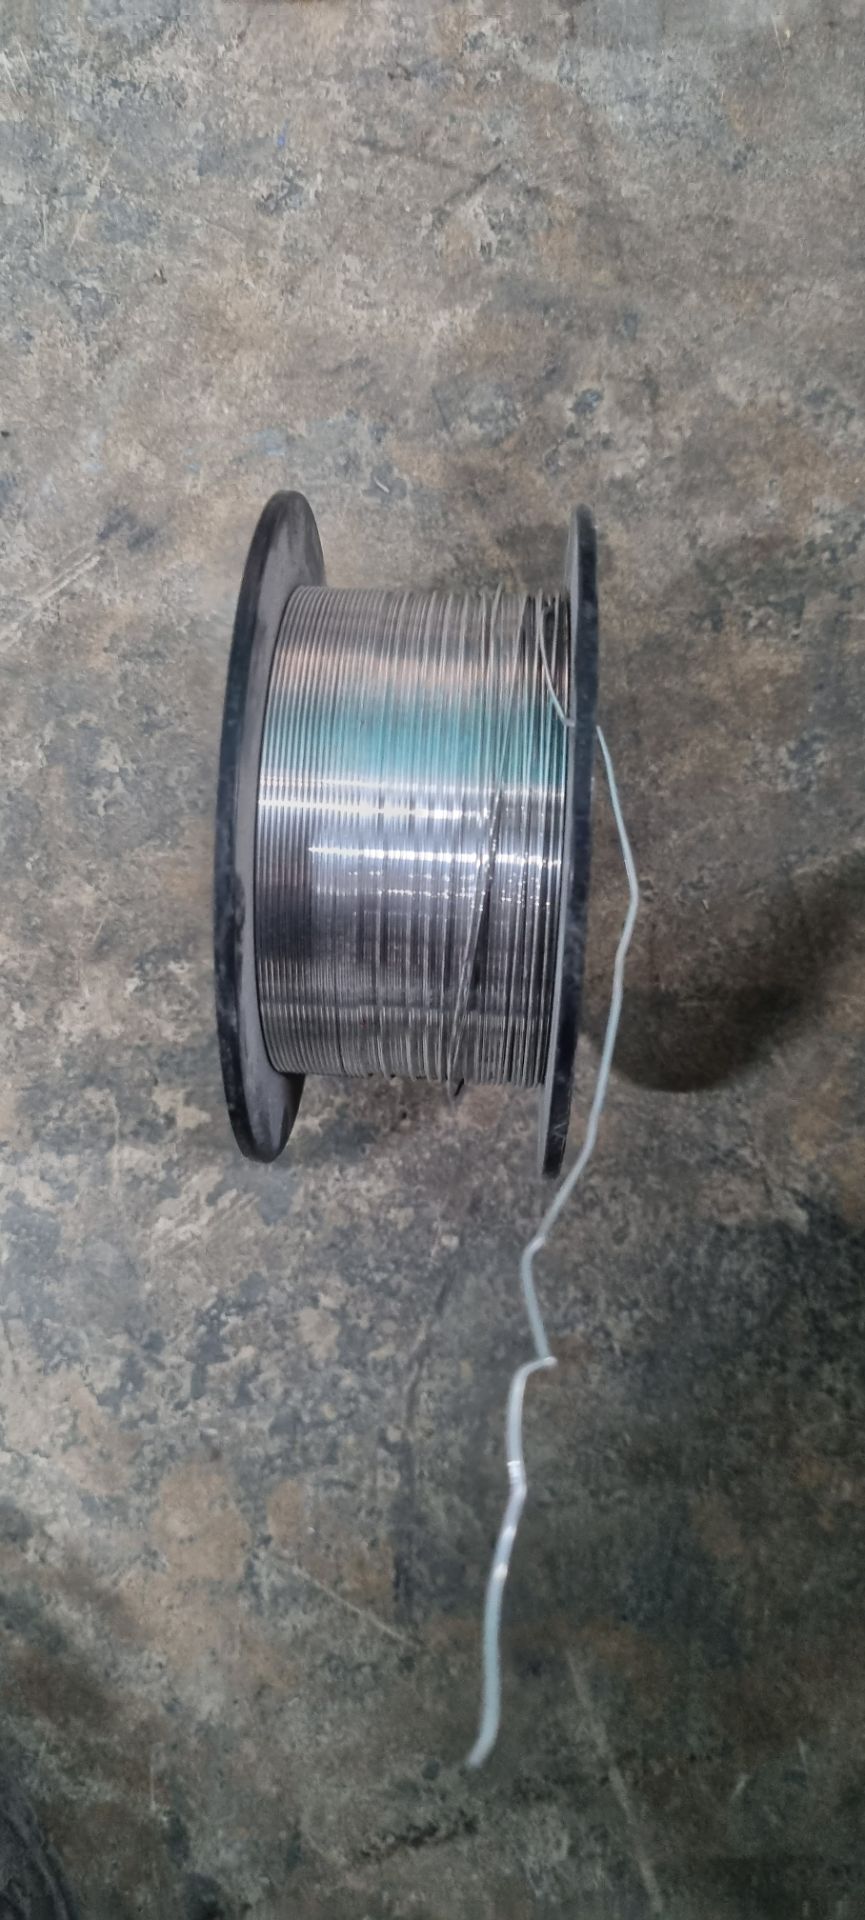 Assorted Tig/Mig Welding Wire, Stainless Steel/Aluminium - Image 6 of 7